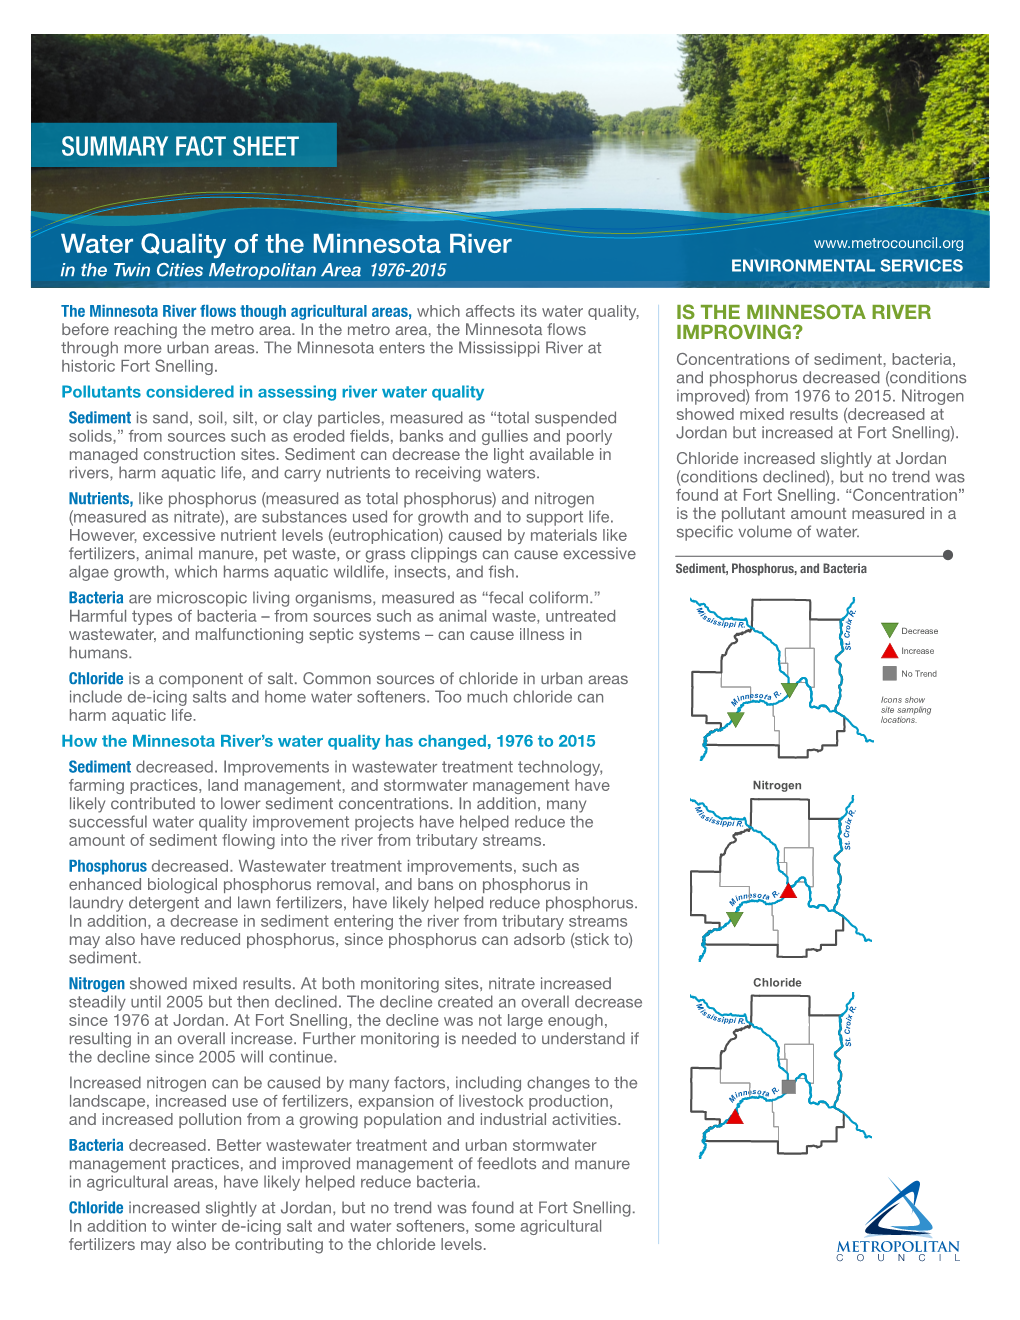 Water Quality of the Minnesota River in the Twin Cities Metropolitan Area 1976-2015 ENVIRONMENTAL SERVICES